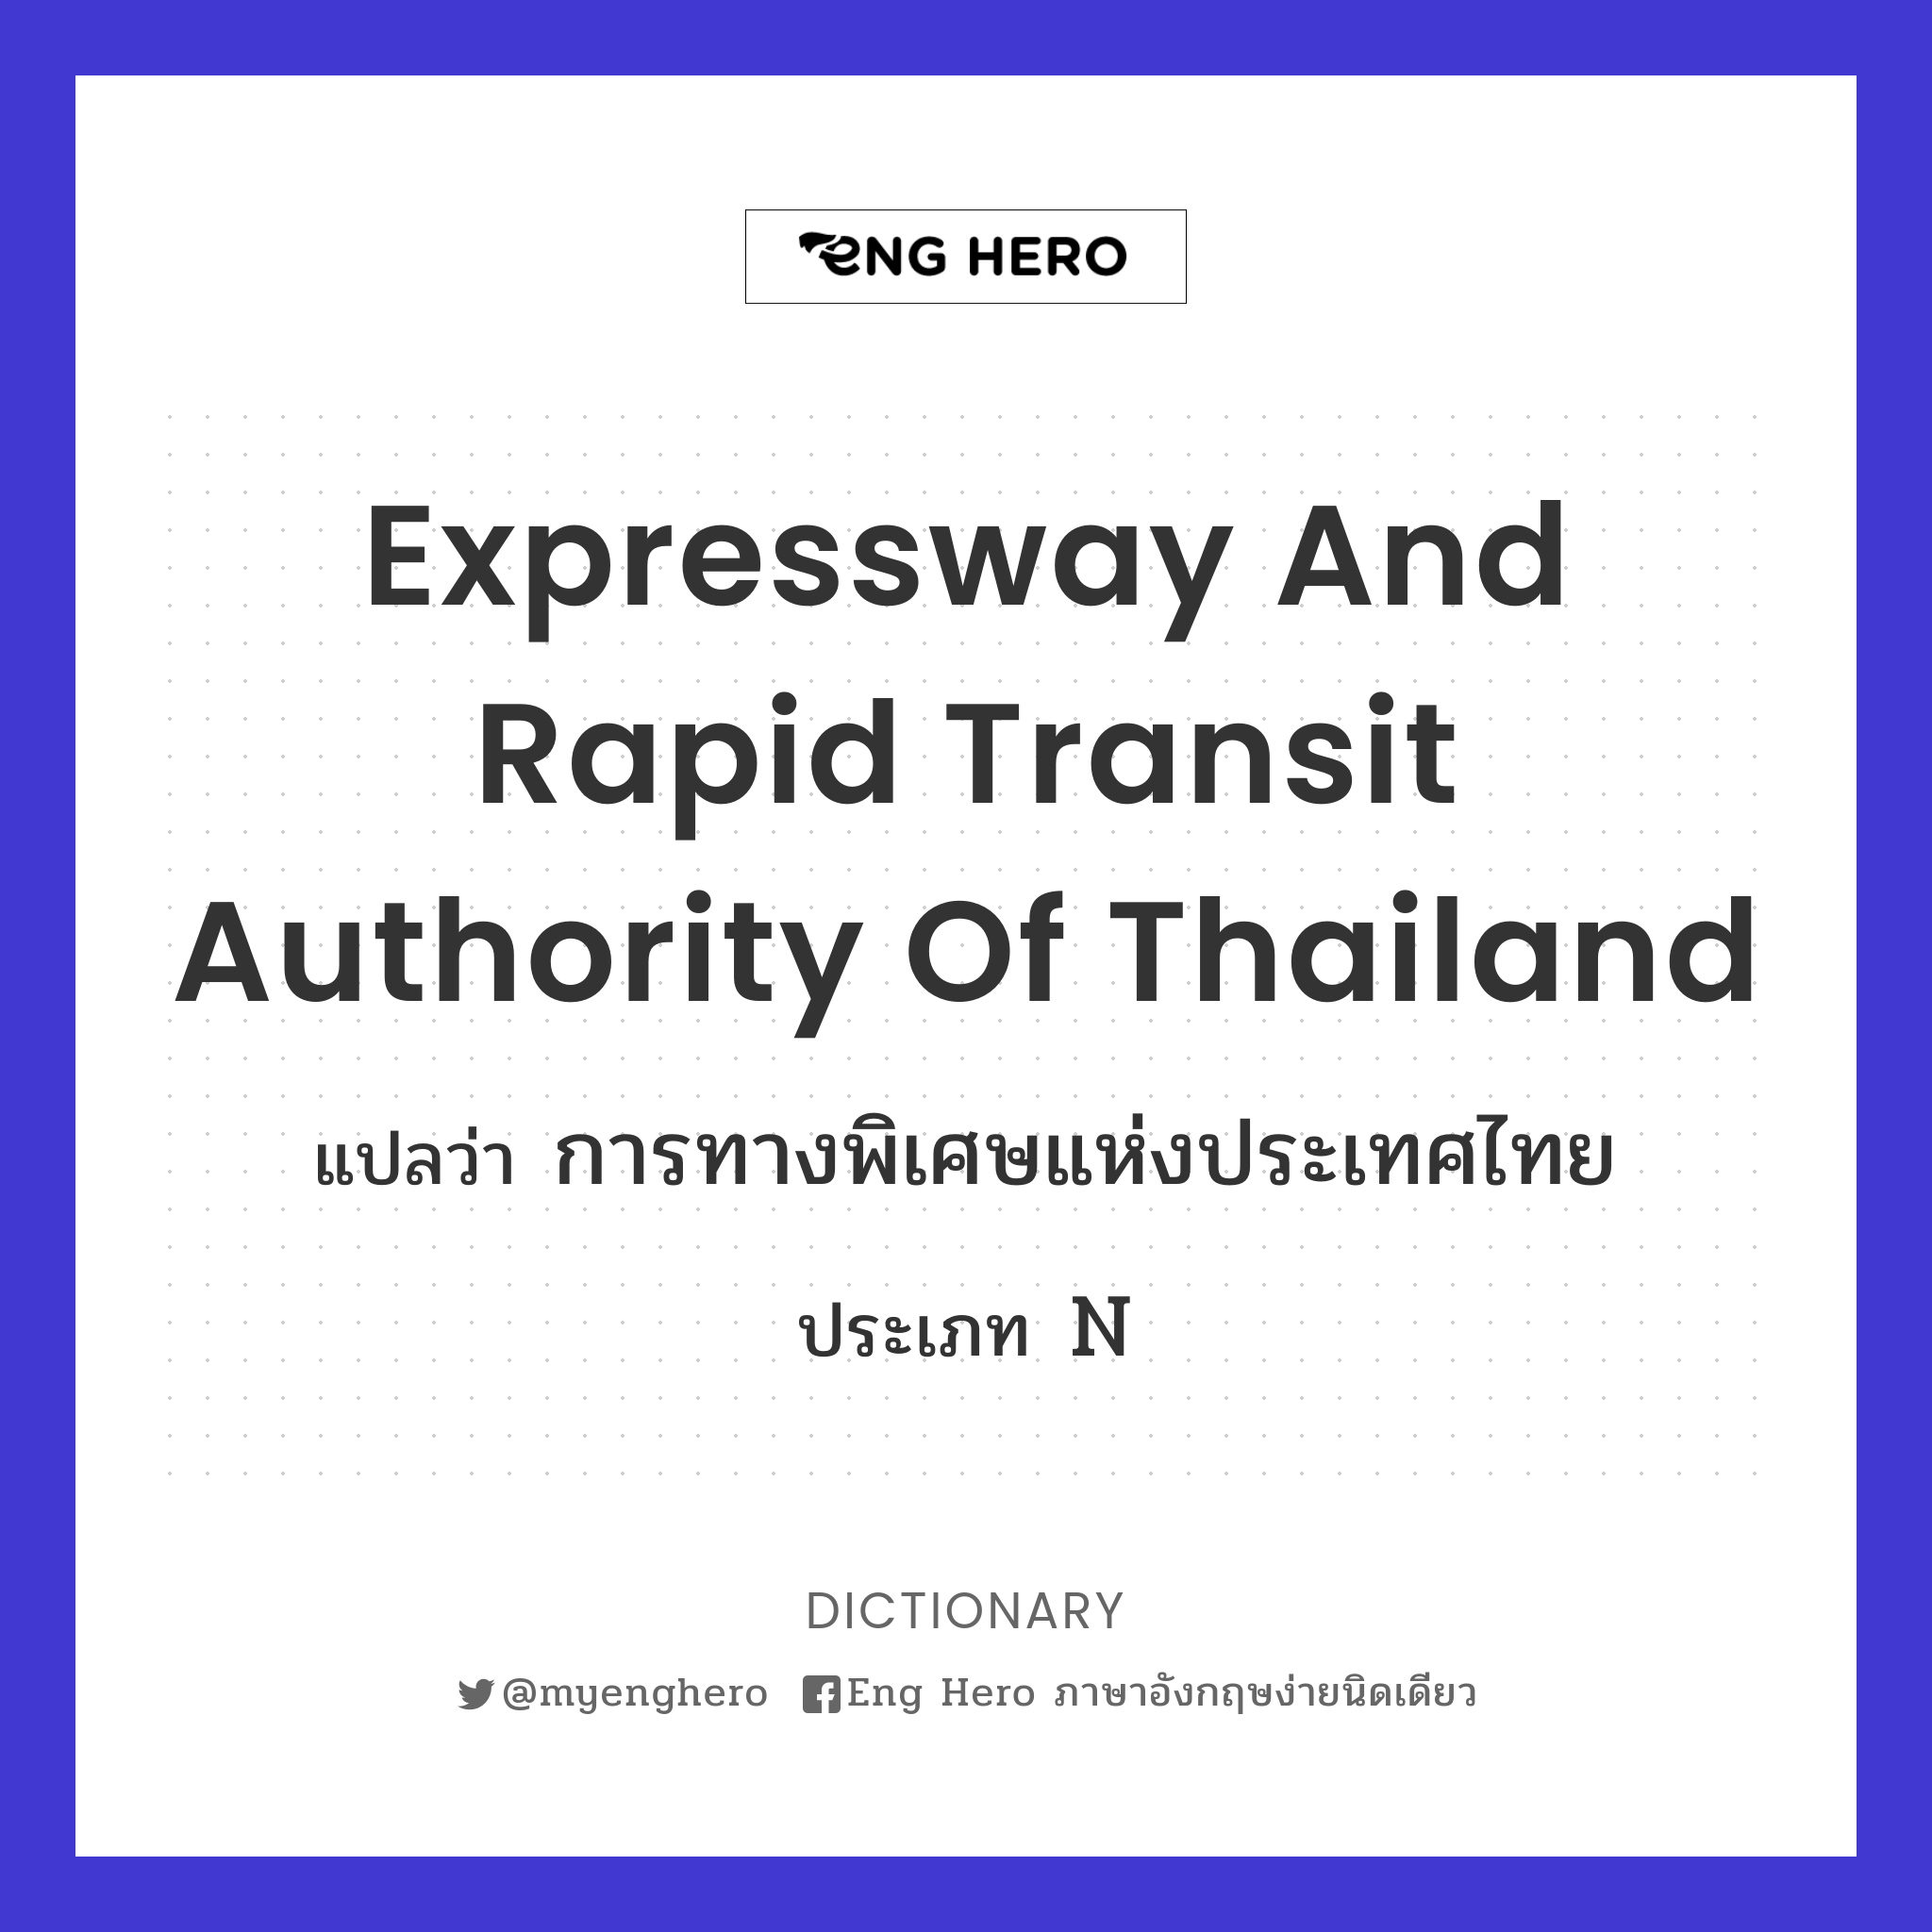 Expressway and Rapid Transit Authority of Thailand